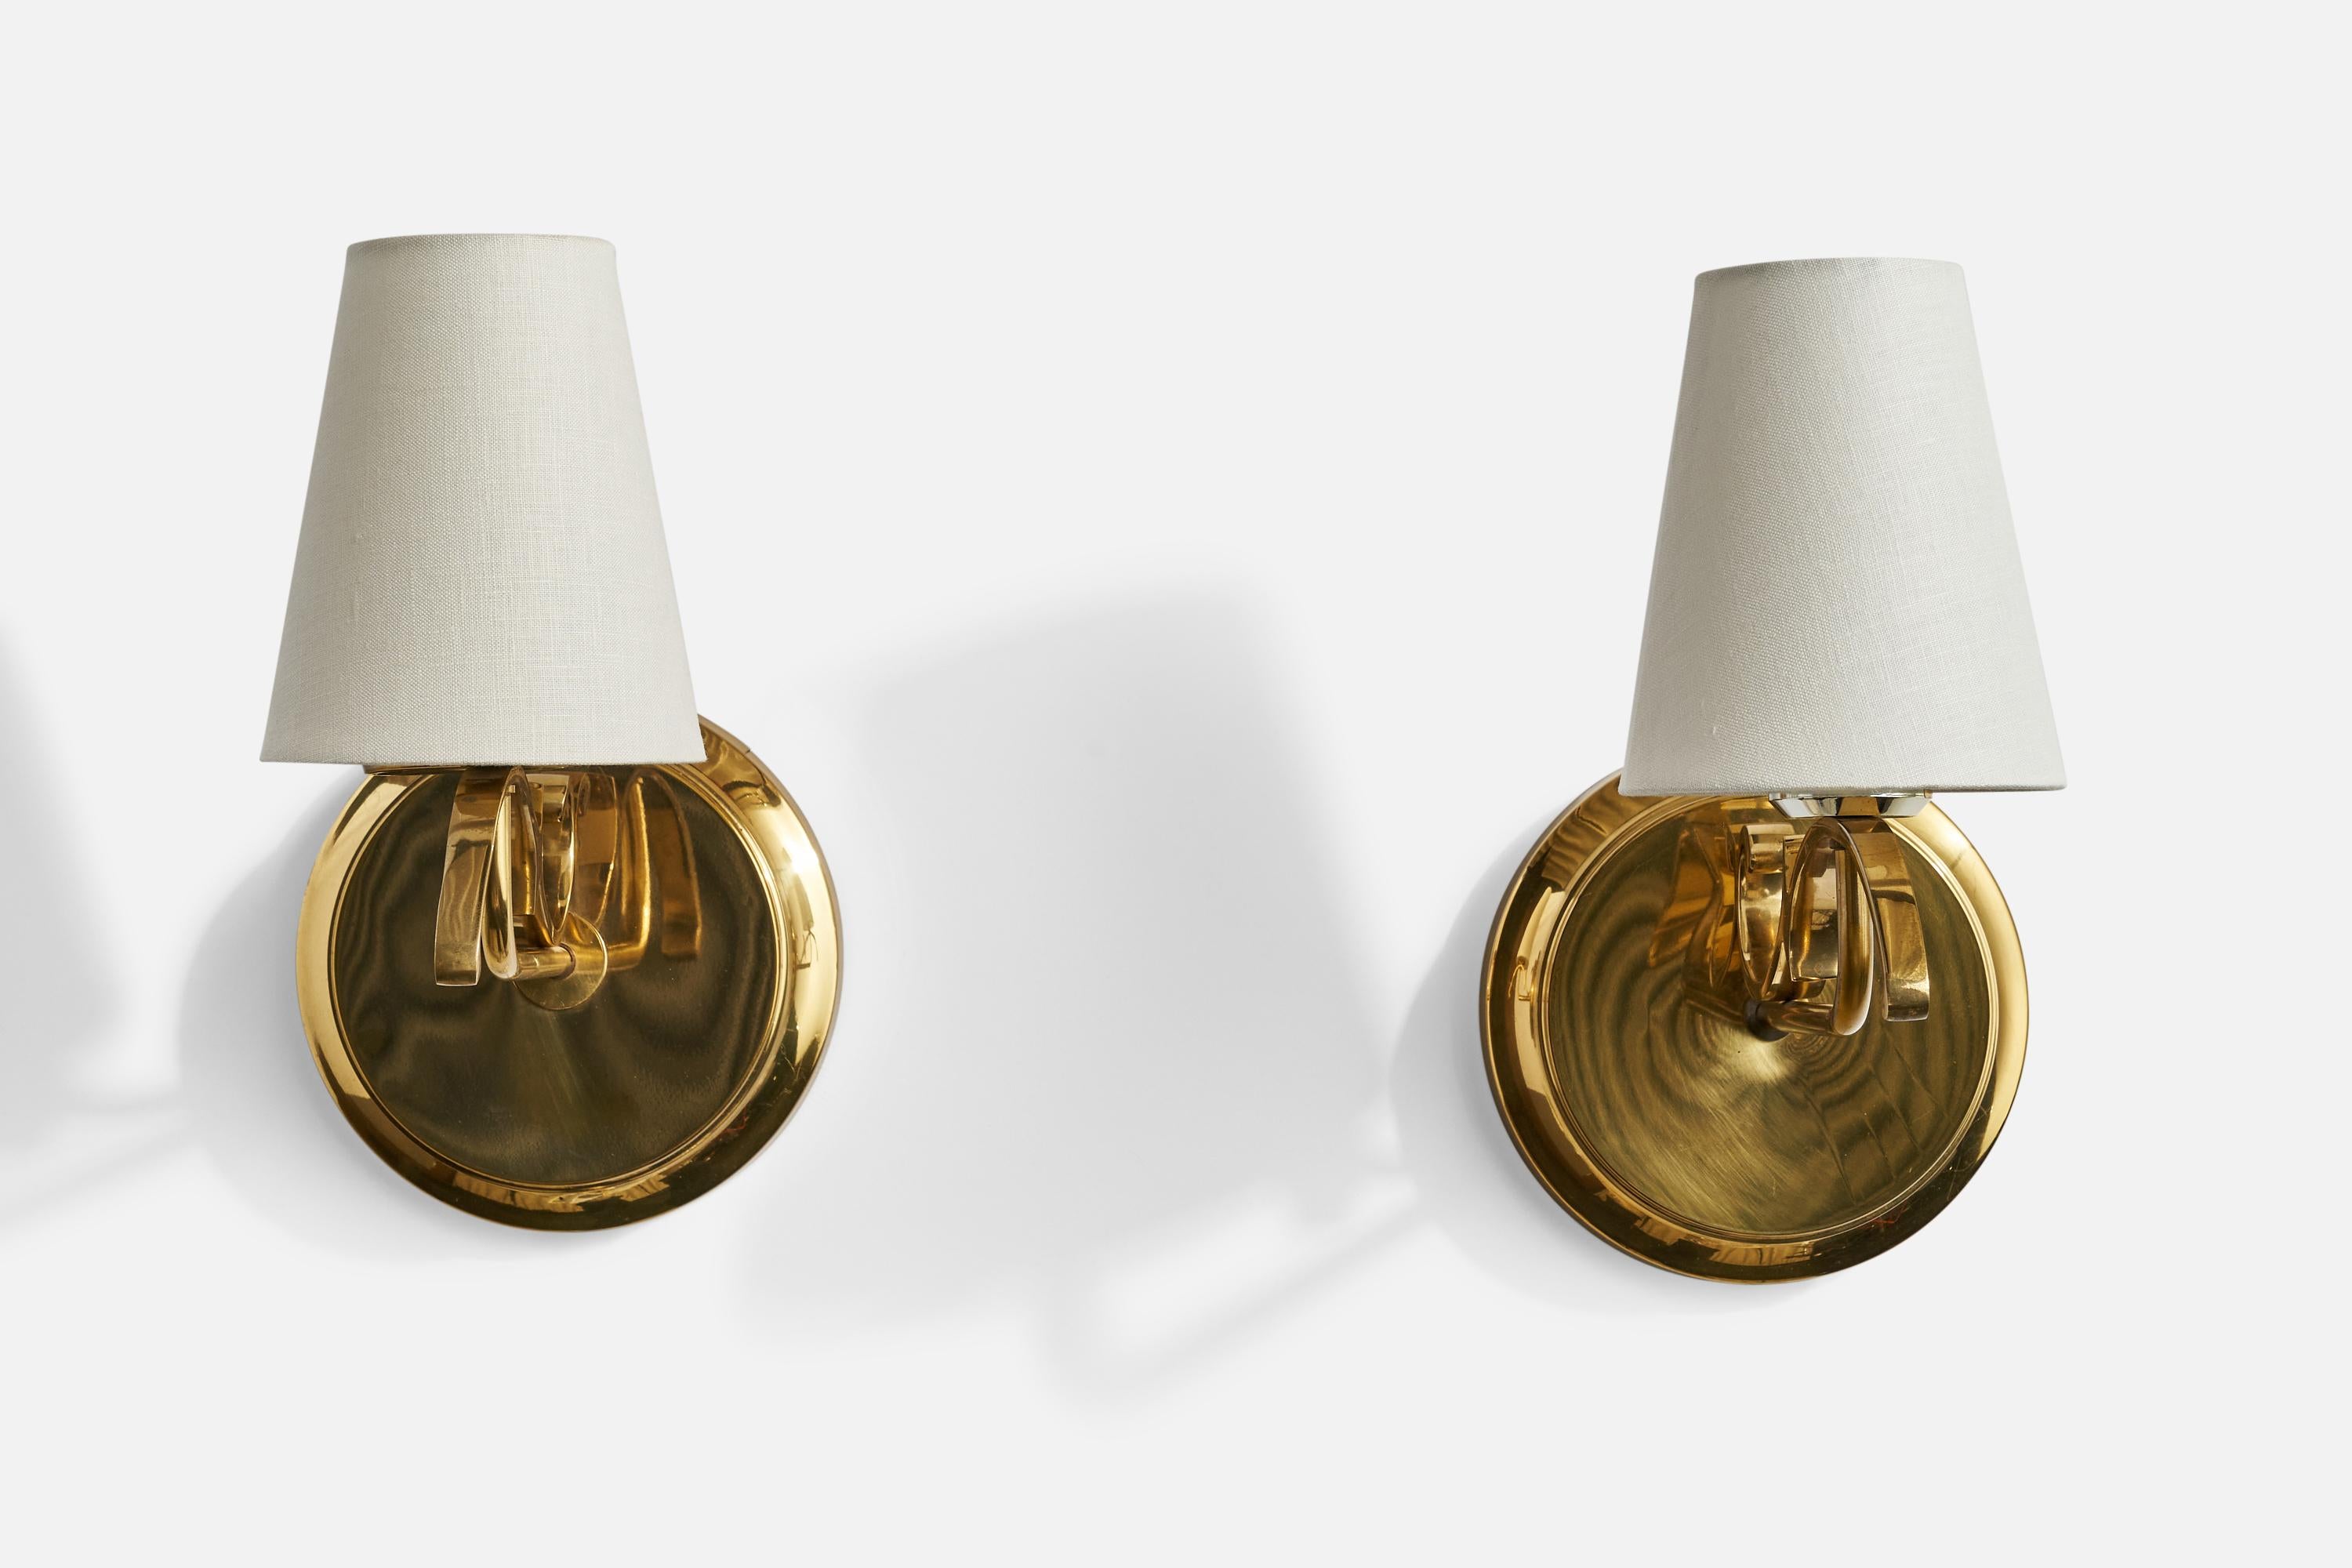 A pair of brass and white fabric wall lights designed and produced by TSAR, Sweden, 1970s.

Overall Dimensions (inches): 12” H x 5” W x 10.5”  D
Back Plate Dimensions (inches): 7.25”  H x 7.25”  W x 2” D
Bulb Specifications: E-26 Bulb
Number of